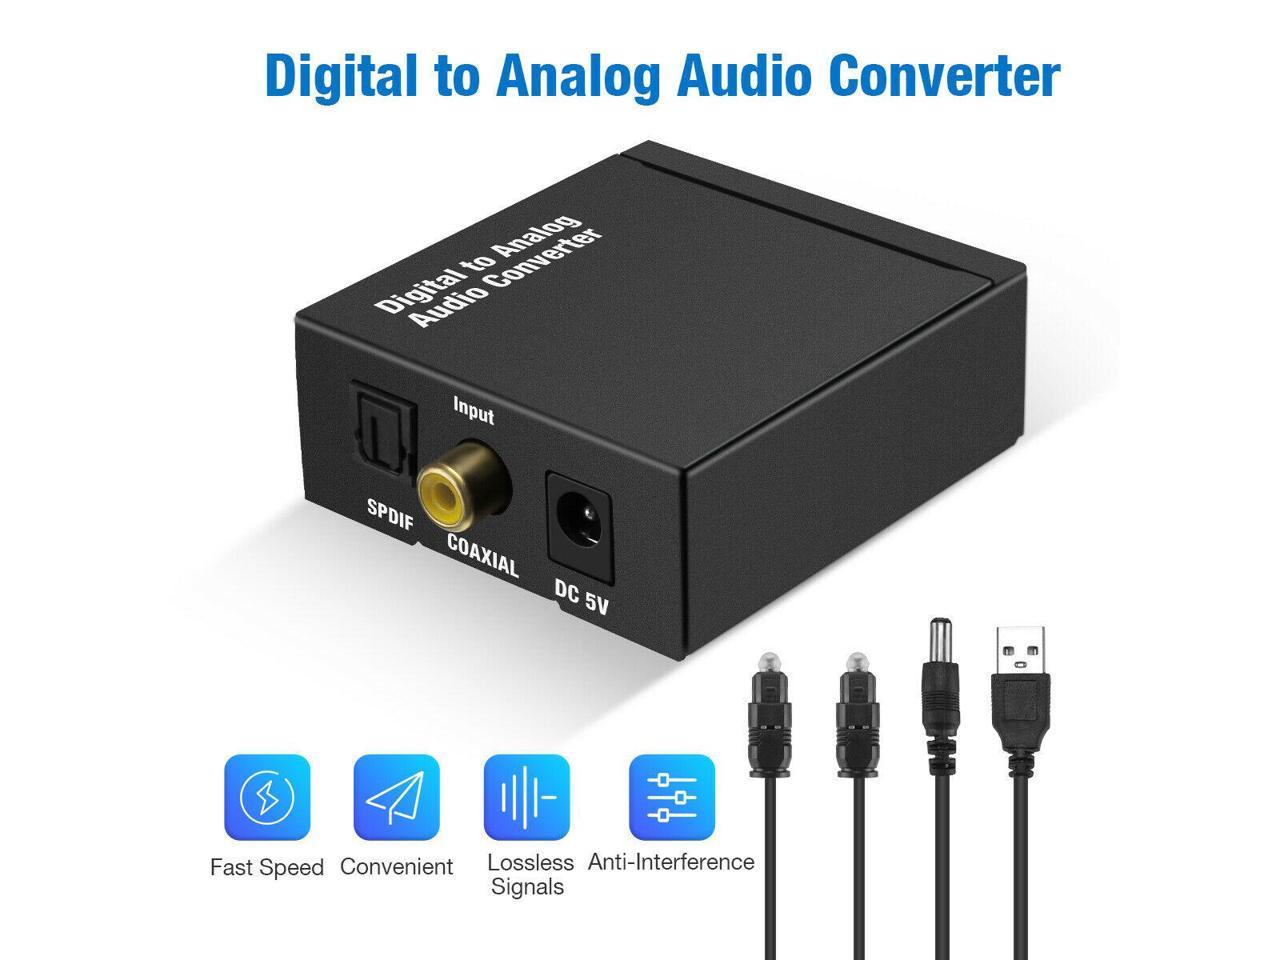 Black Fosmon 2-Way Digital Audio Converter Coaxial to/from Optical Toslink Adapter Splitter with 5V USB AC Adapter and Mini USB Cable